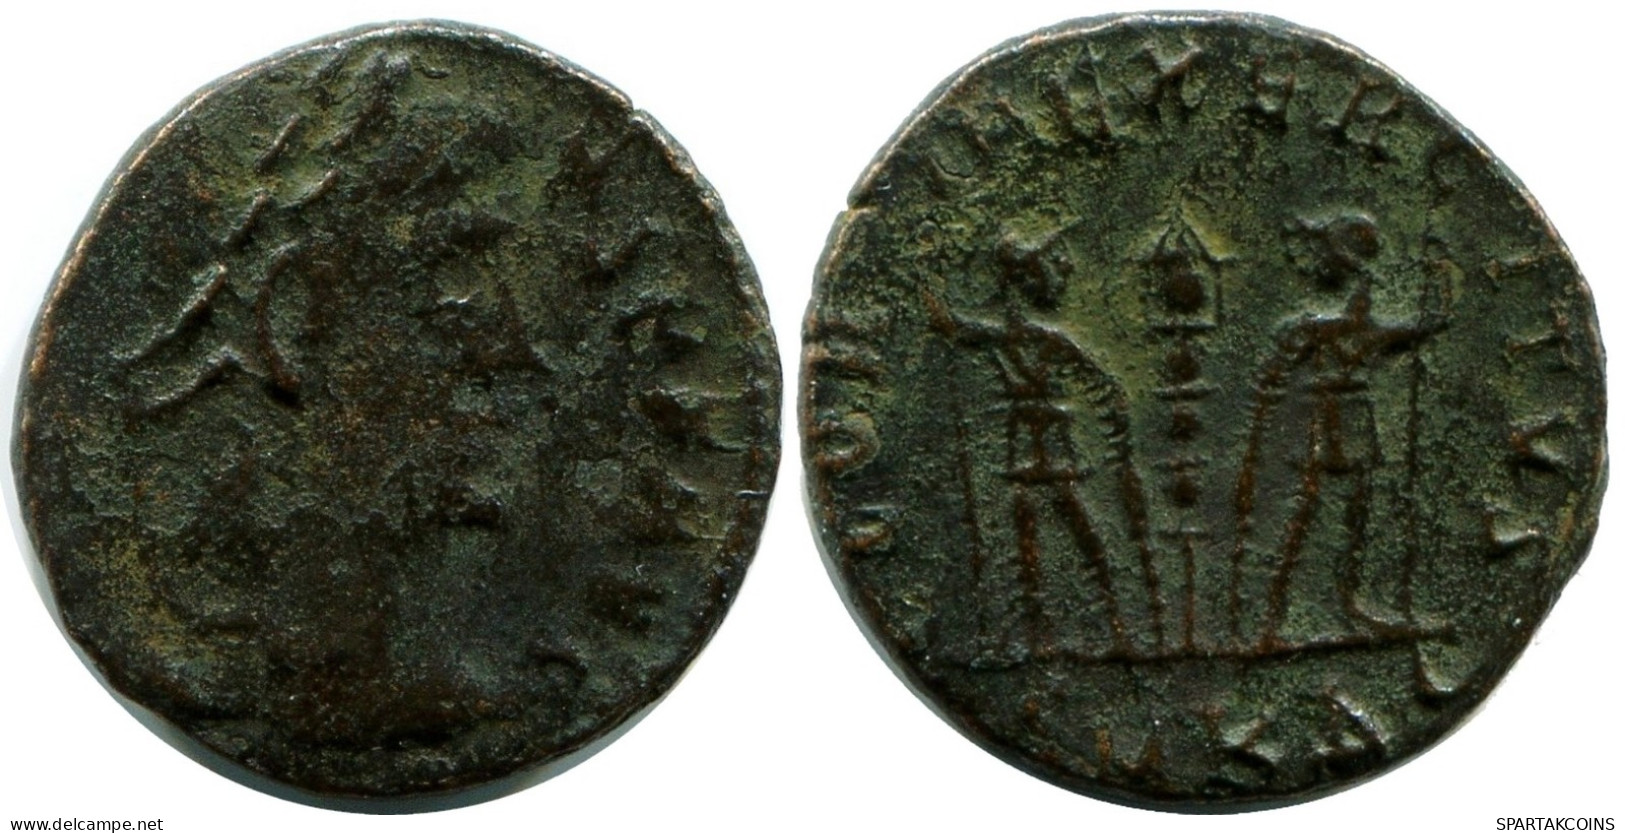 CONSTANS MINTED IN CYZICUS FOUND IN IHNASYAH HOARD EGYPT #ANC11689.14.D.A - The Christian Empire (307 AD To 363 AD)